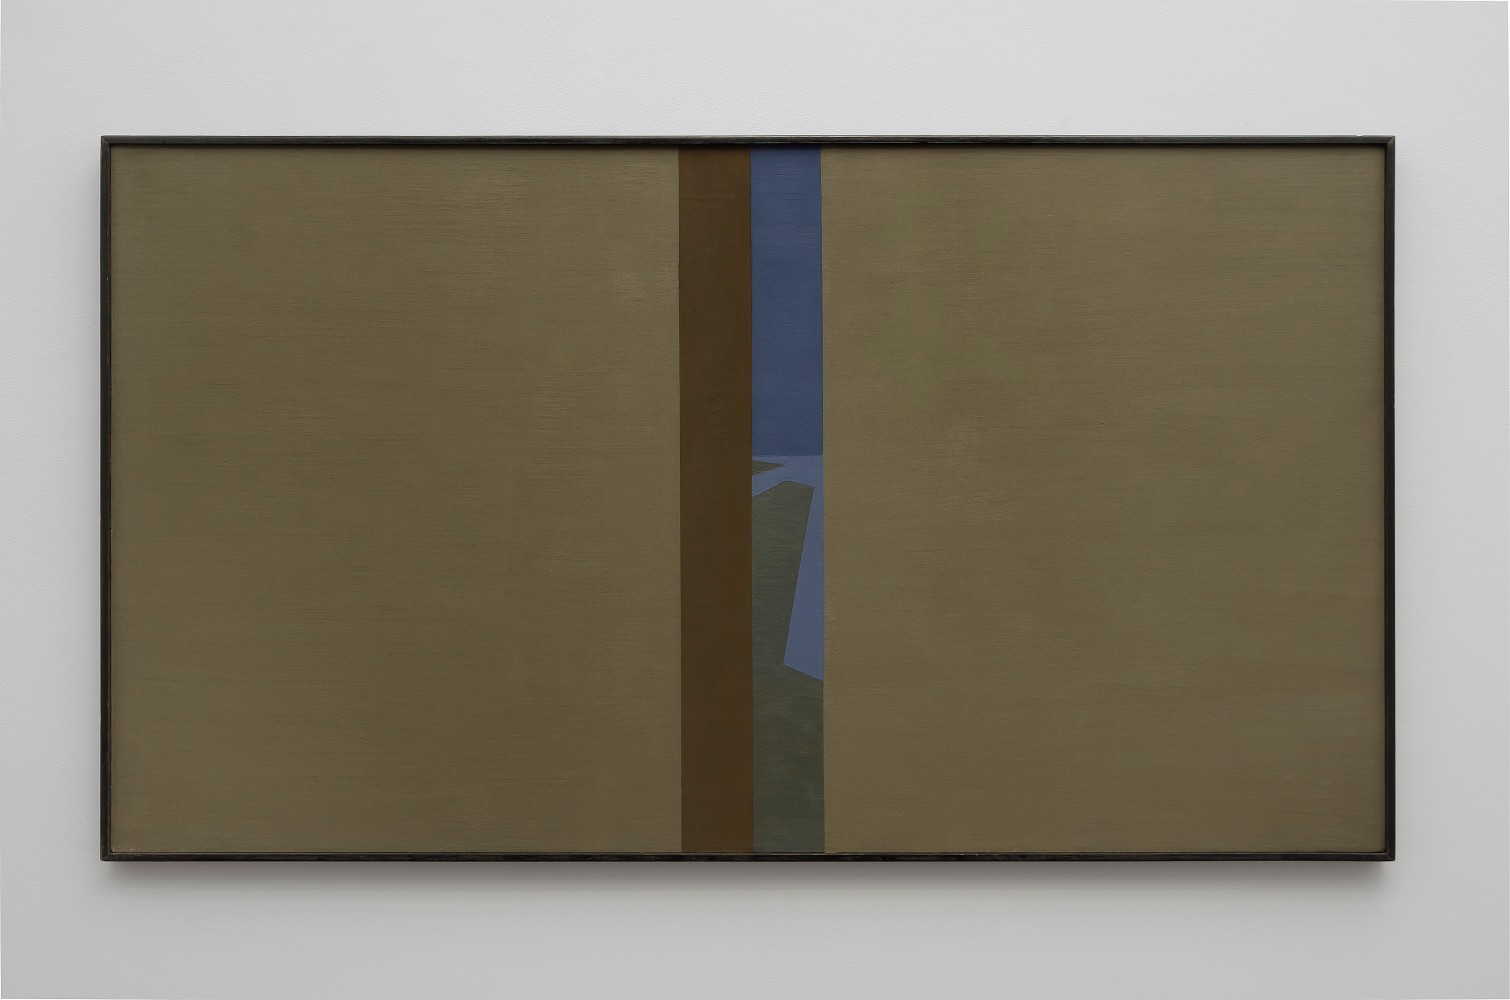 Helen Lundeberg (1908-1999) Narrow View, 1961 oil on canvas 30 x 54 inches; 76.2 x 137.2 centimeters LSFA# 01209